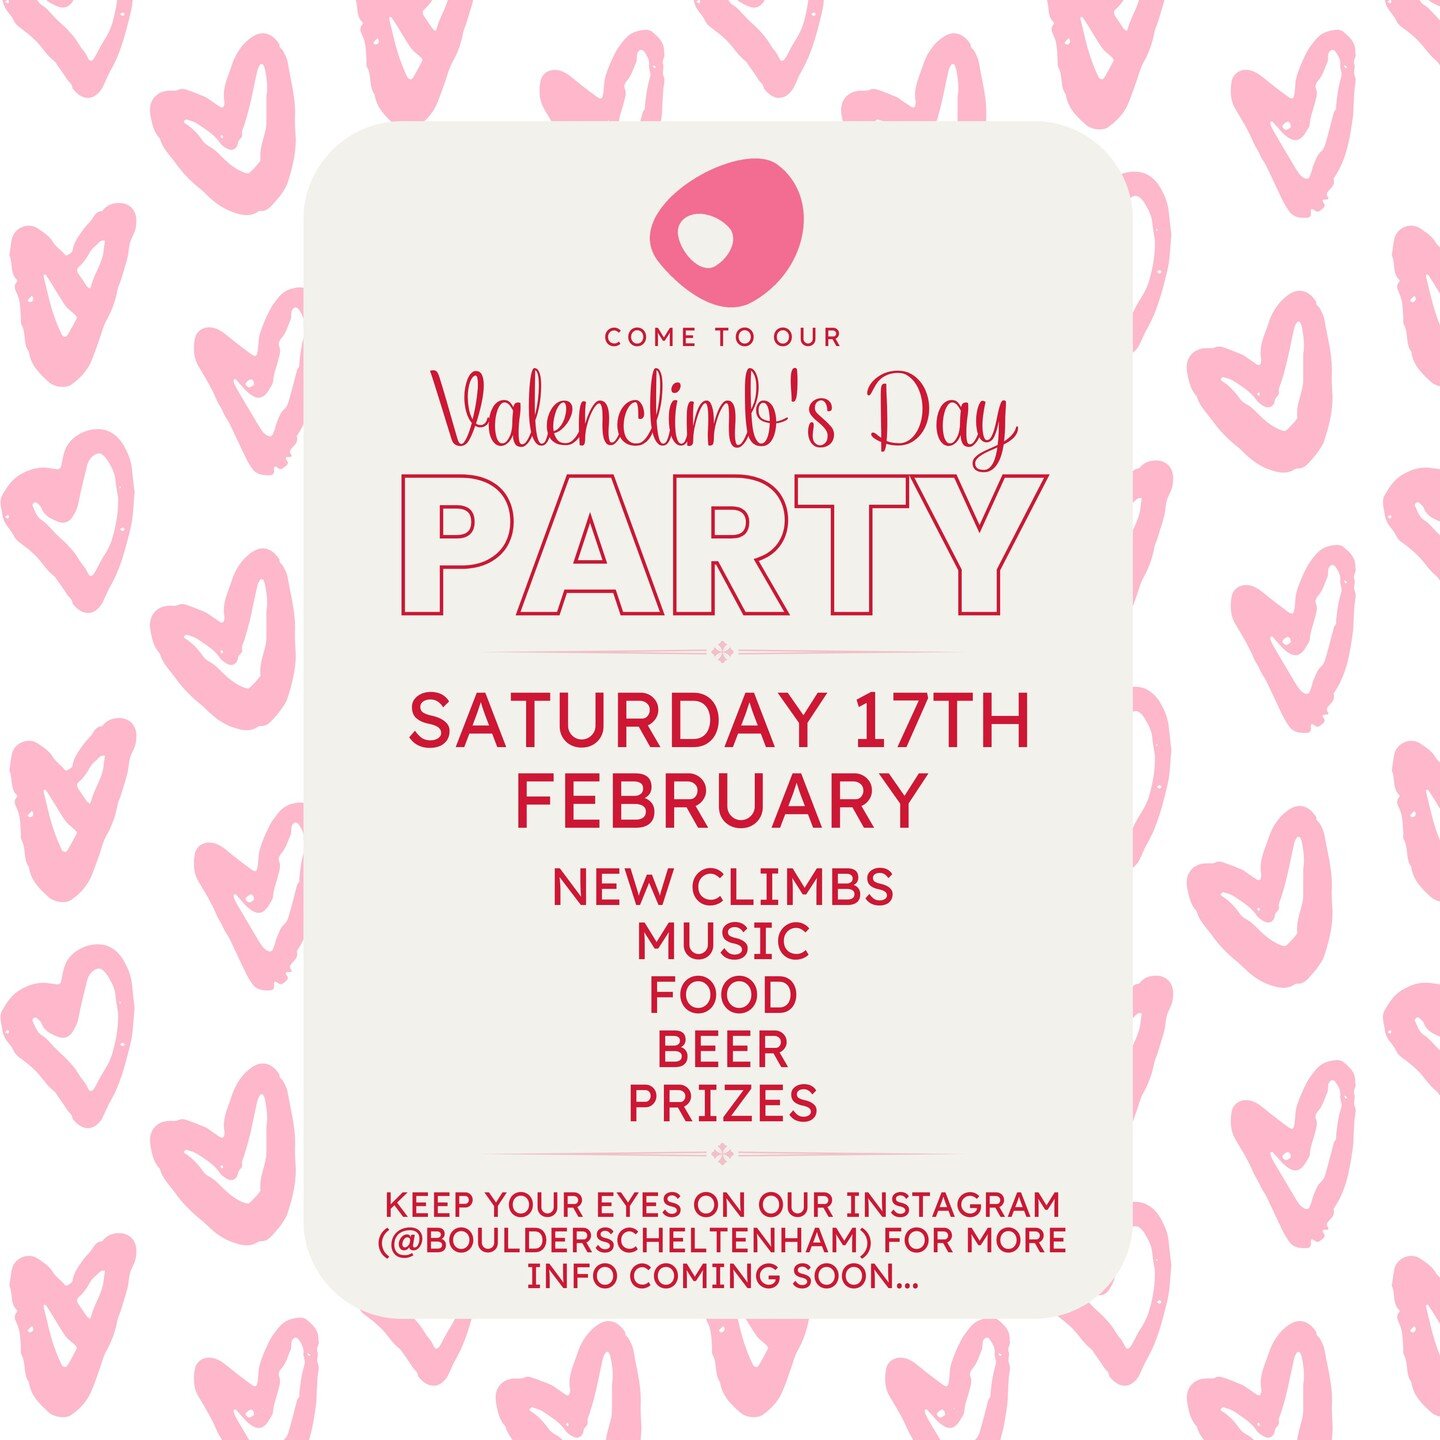 What are you doing next Saturday? Coming to our Valen-climb's day party taking place between 12pm-4pm of course! ❤️

🎉 We're bringing new climbs, food/drink, and music, and you're bringing a pal or your other half to try our party circuit (in as muc